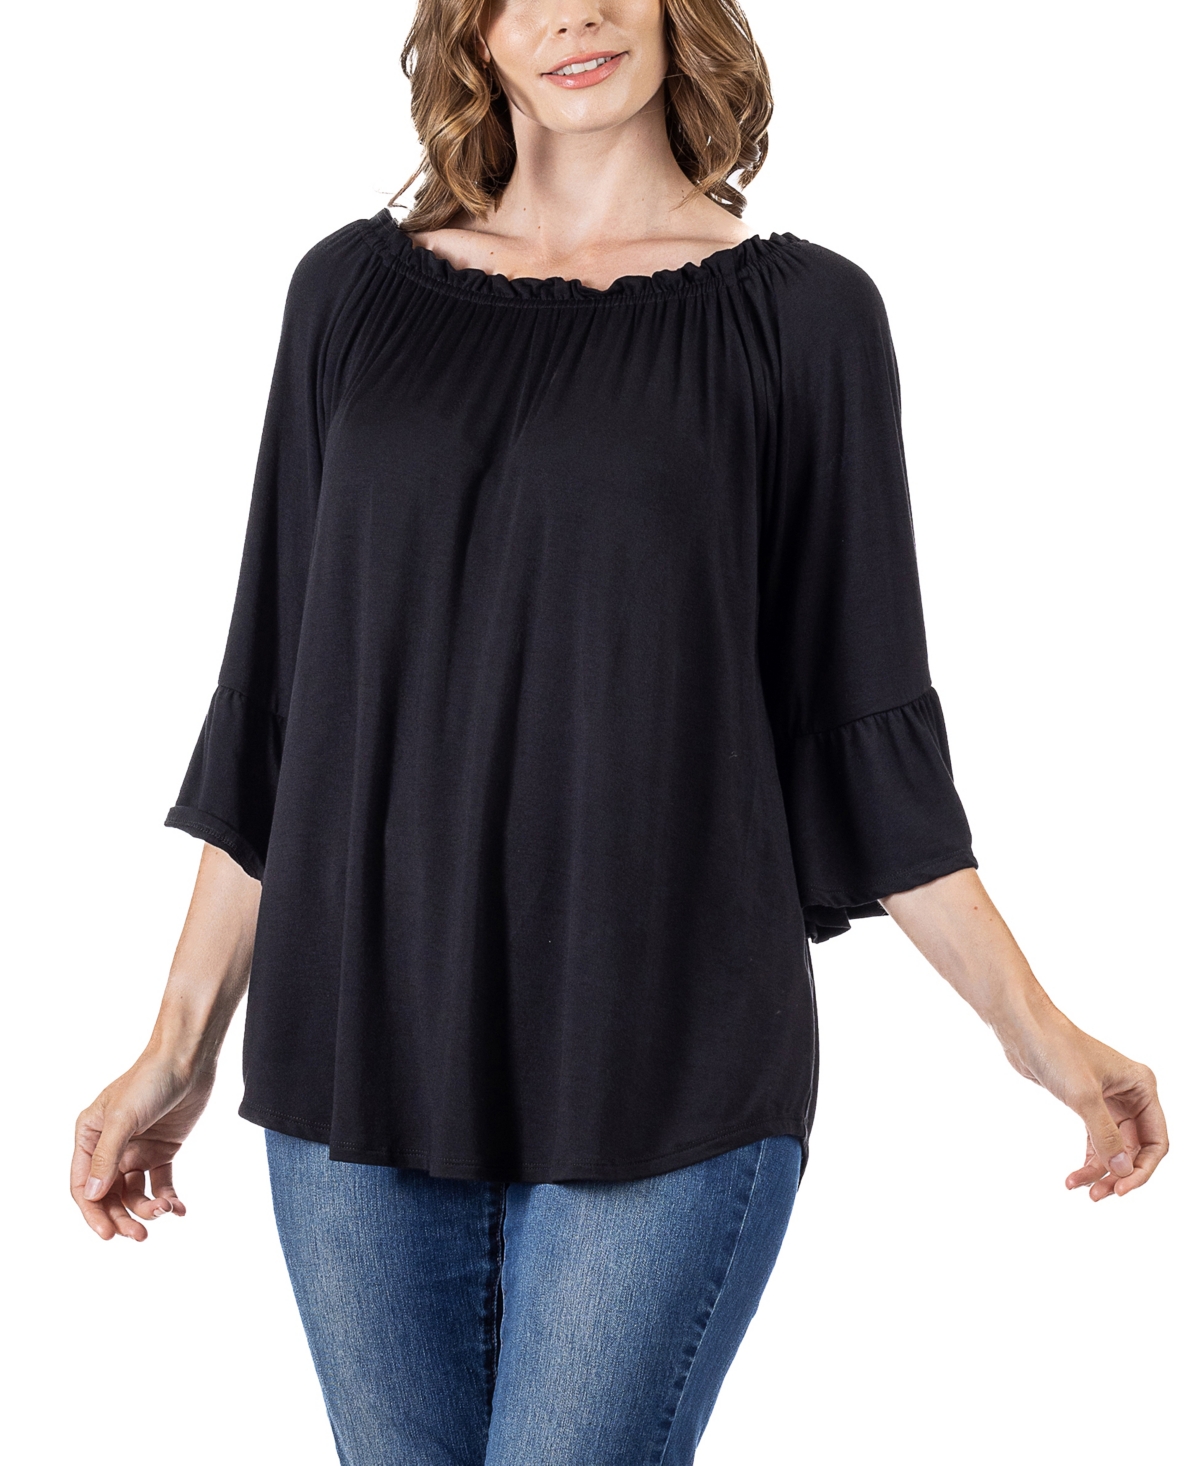 24seven Comfort Apparel Women's Bell Sleeve Loose Fit Tunic Top In Black